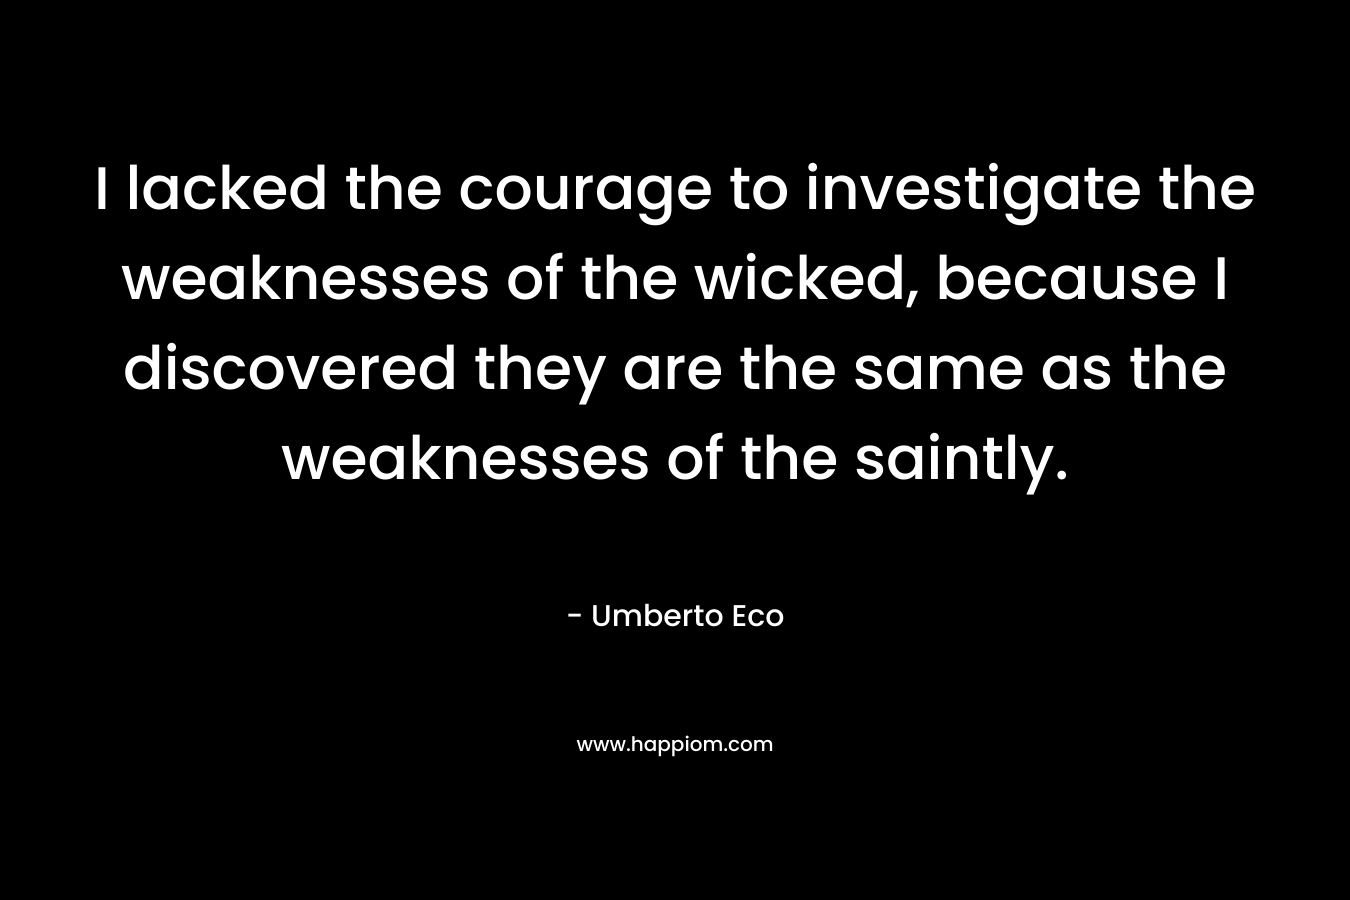 I lacked the courage to investigate the weaknesses of the wicked, because I discovered they are the same as the weaknesses of the saintly.